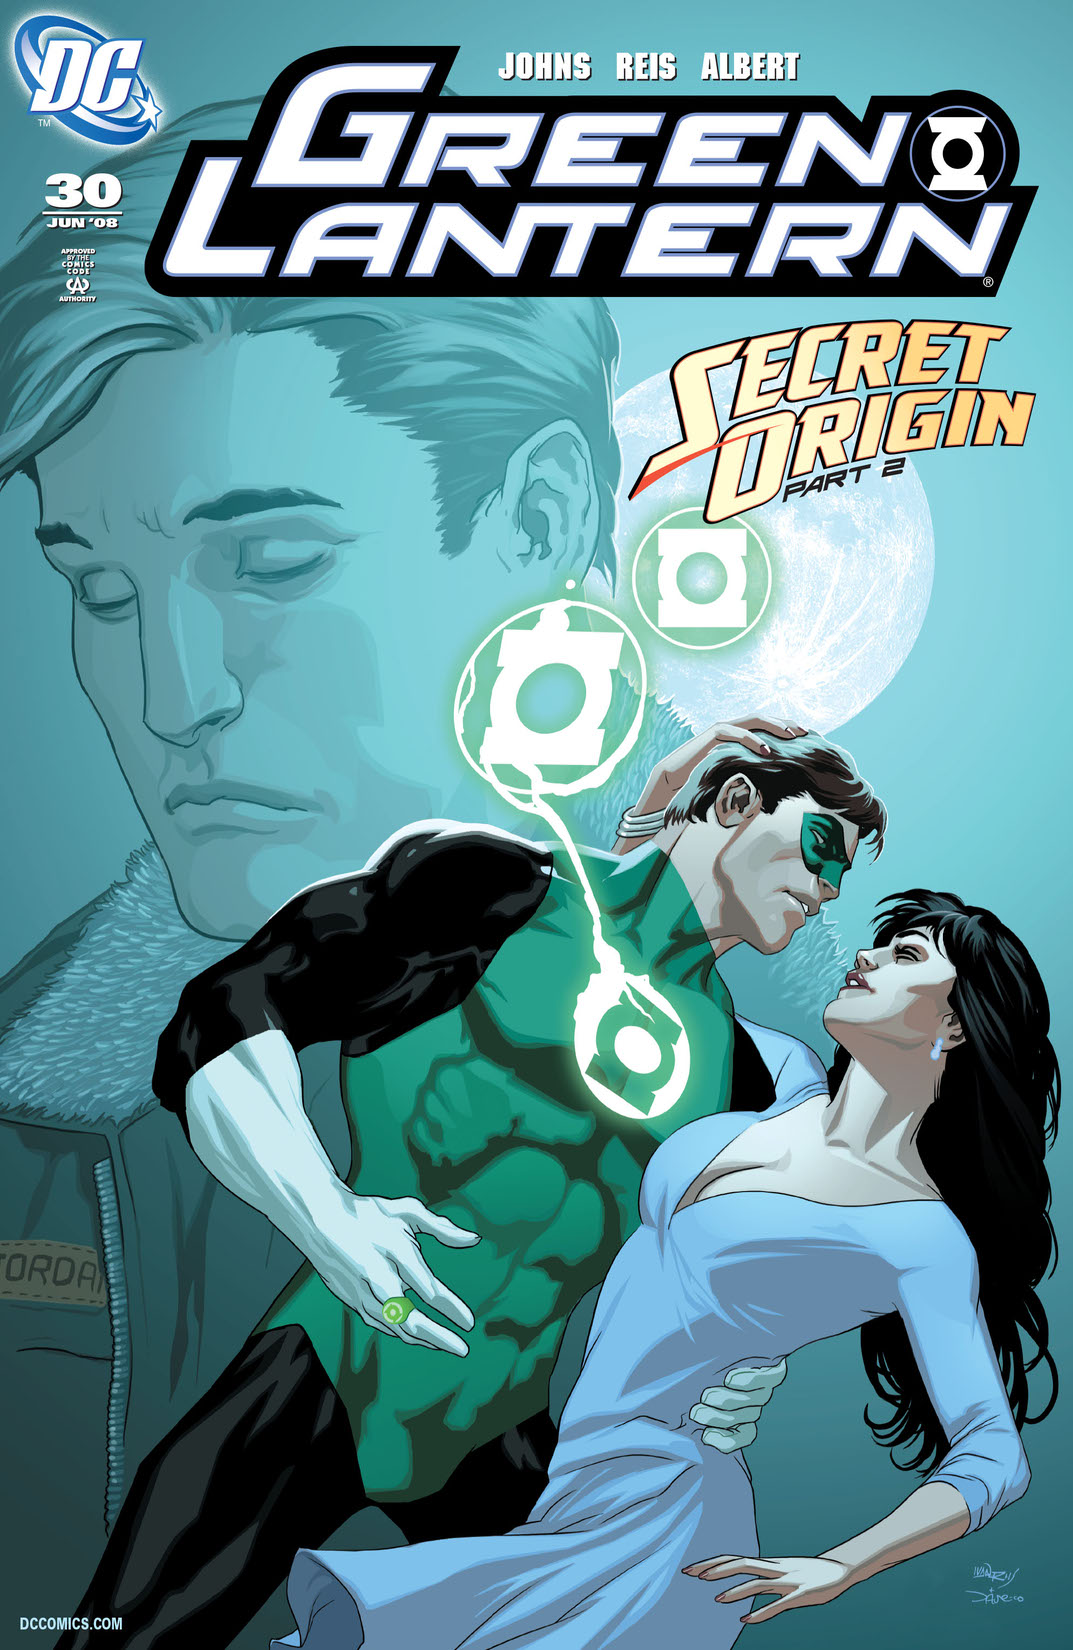 Green Lantern (2005-) #30 preview images